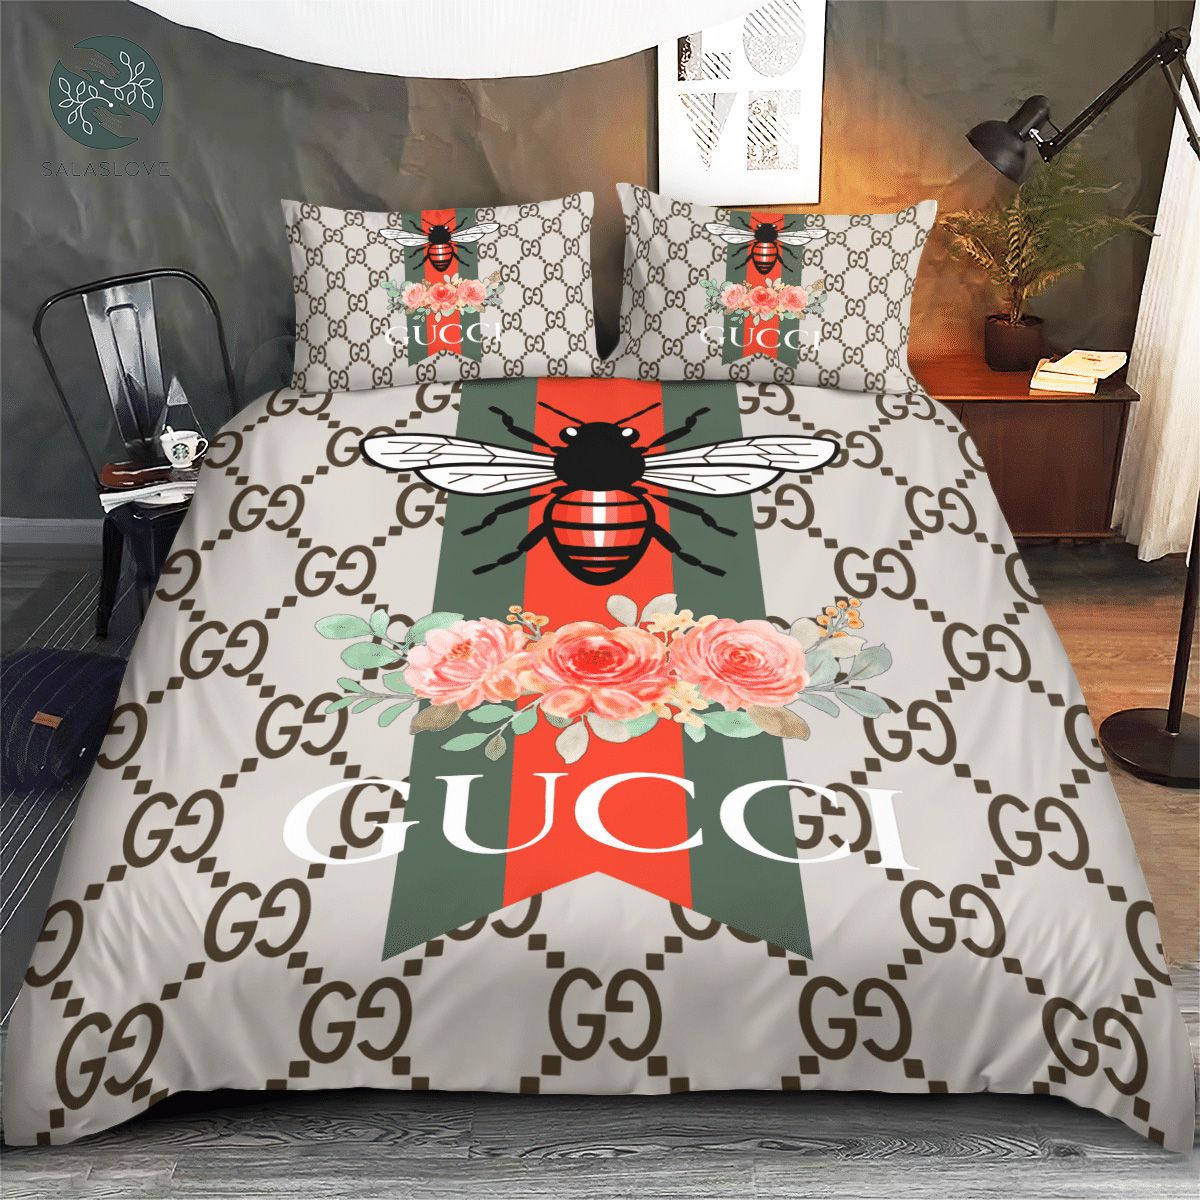 Gucci Bee and Flower Italian High-end Brand Bedding Sets